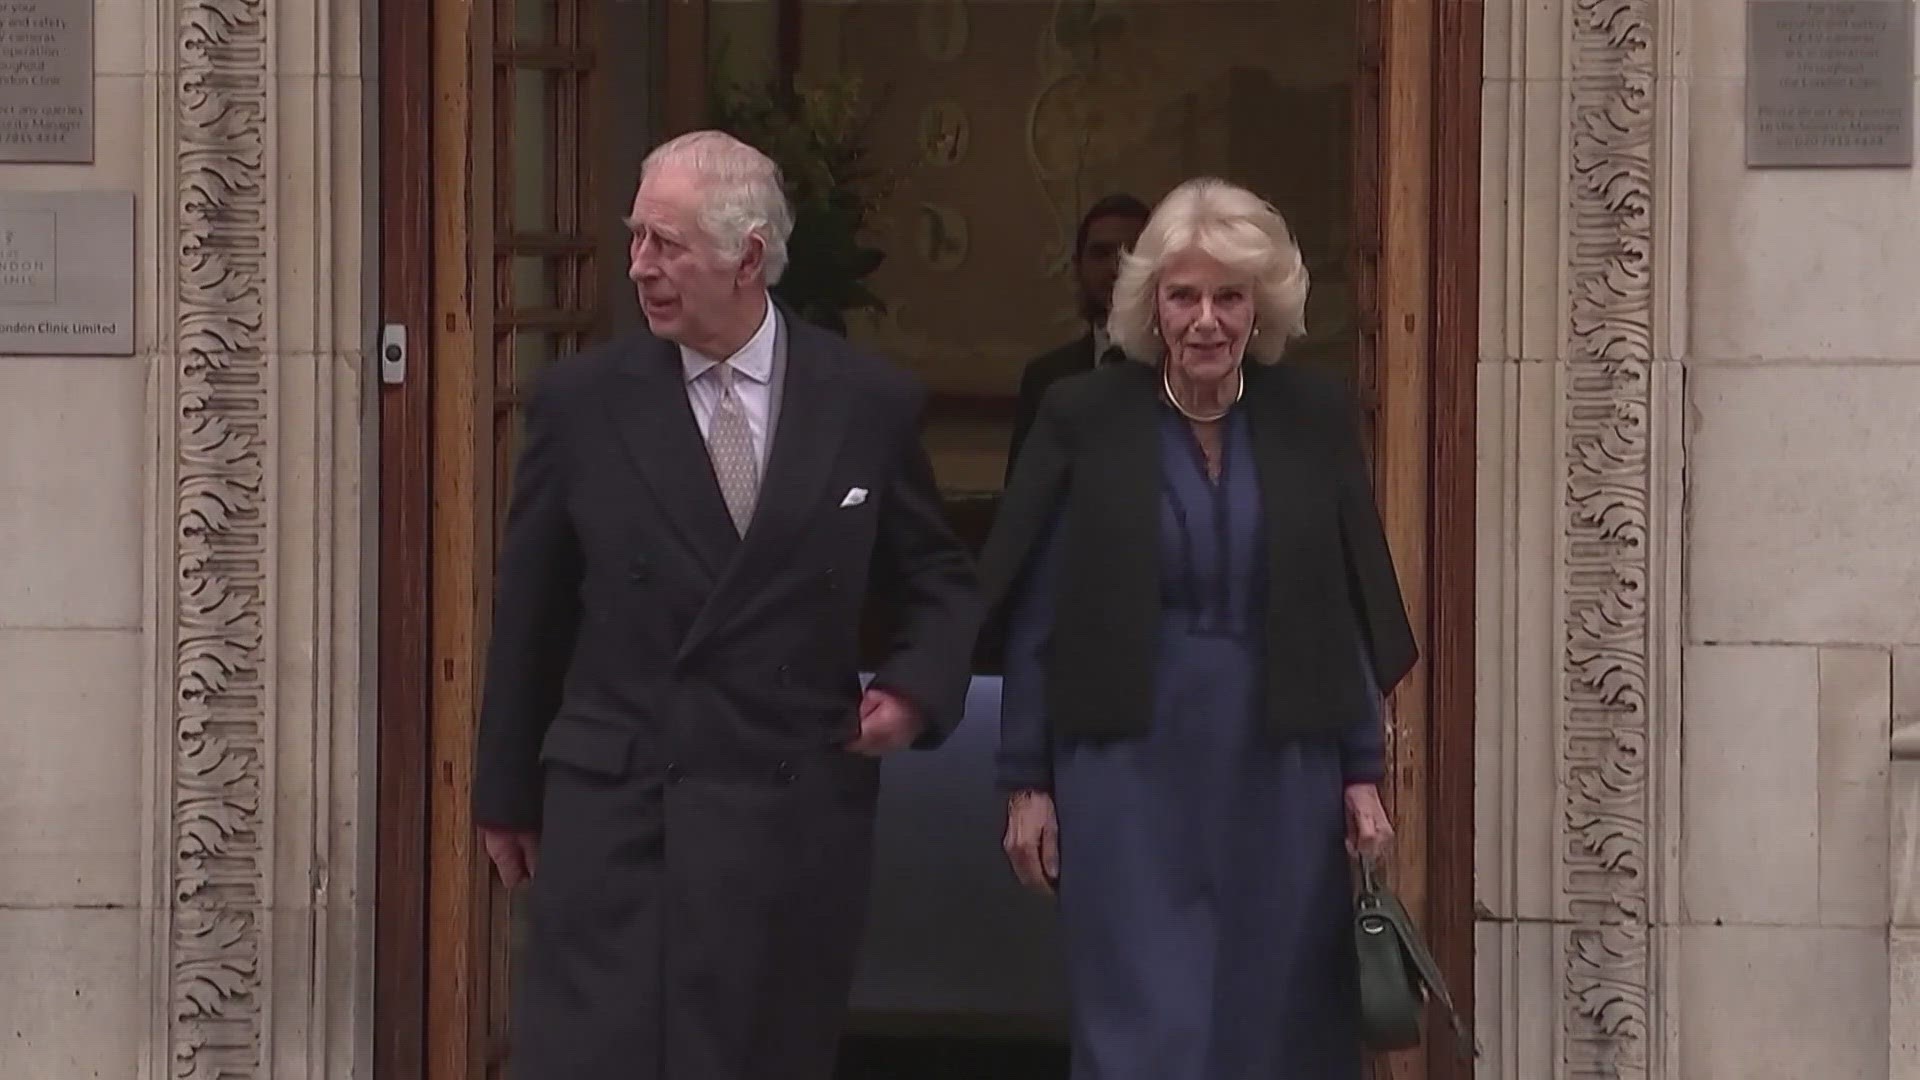 Buckingham Palace announced Monday that King Charles has been diagnosed with cancer.